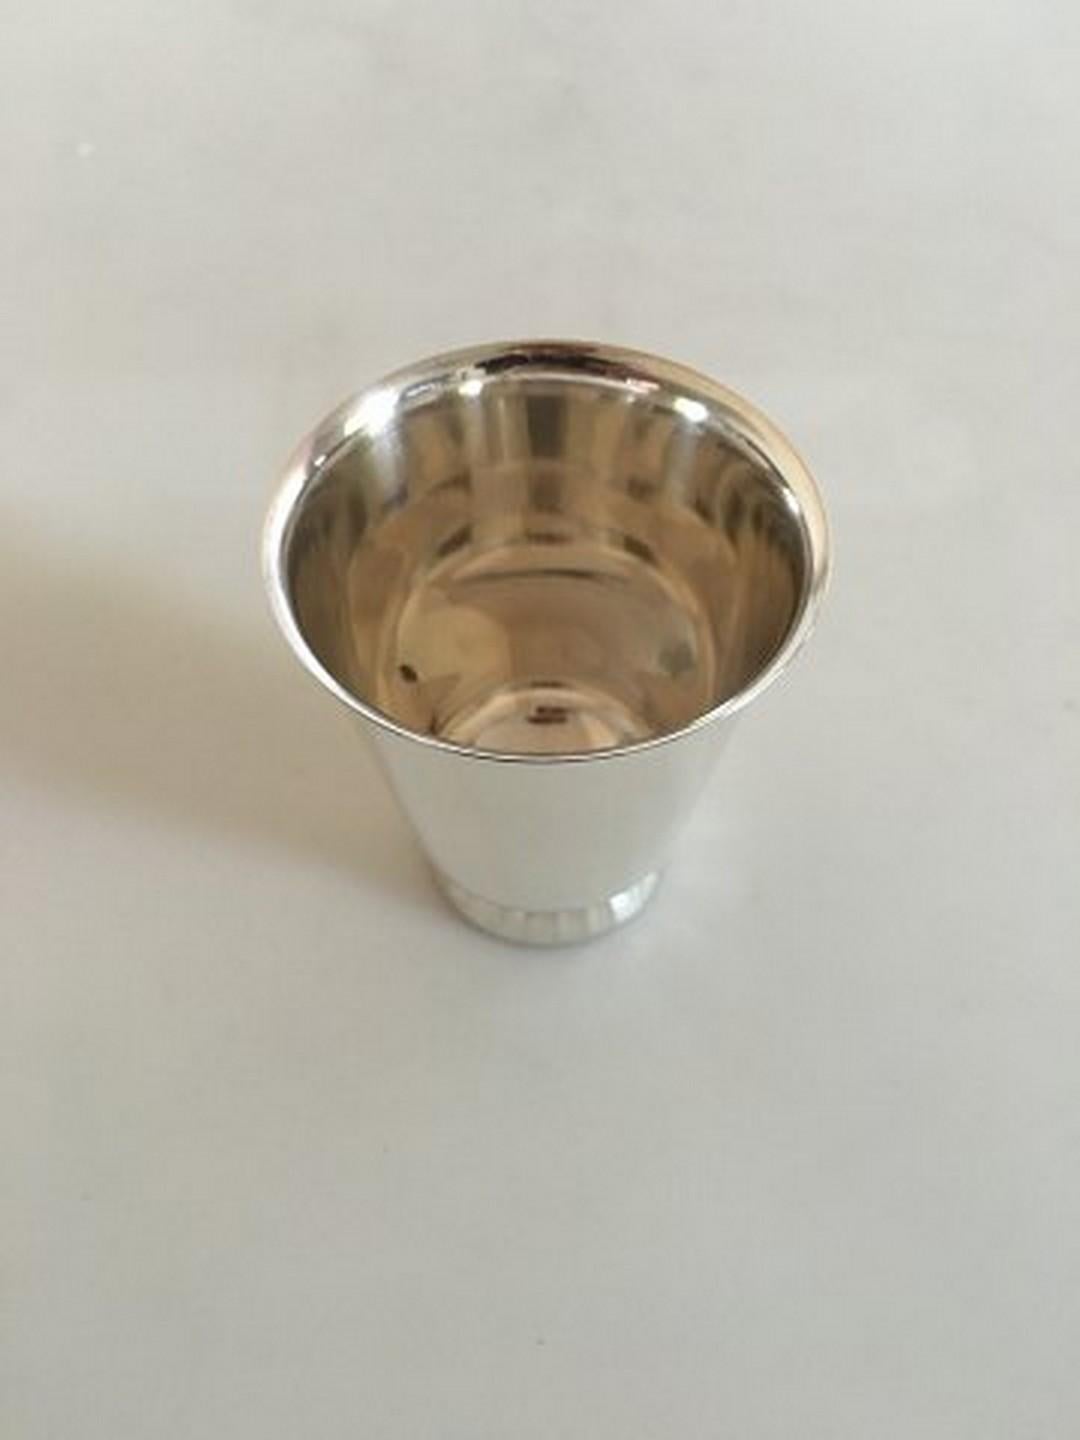 Georg Jensen sterling silver Sigvard Bernadotte cup. From after 1945. In perfect condition. Measures 6.2 cm tall (2 7/16